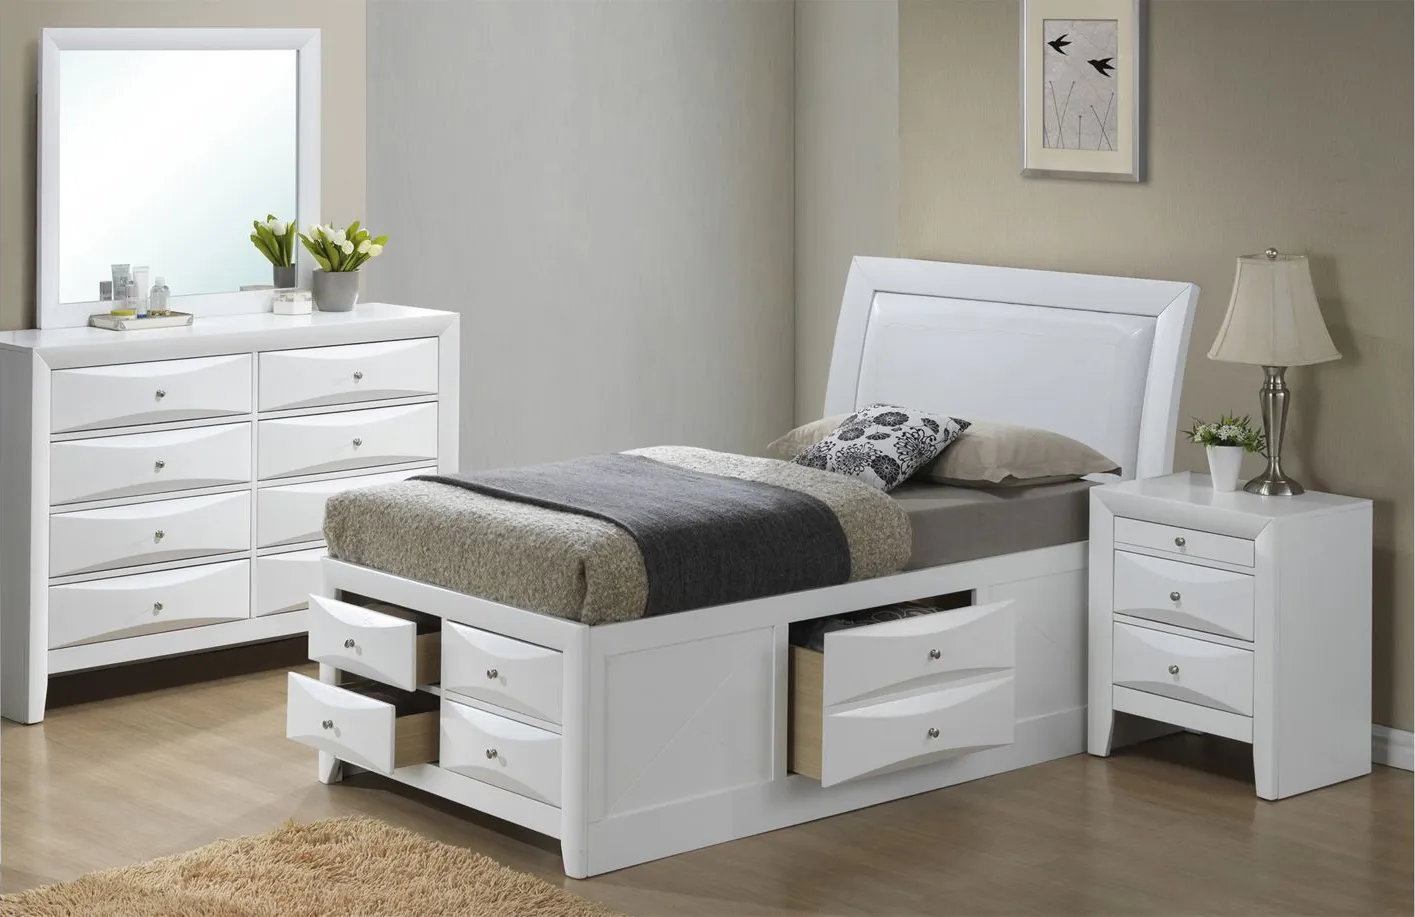 Marilla 4-piece Upholstered Captain's Bedroom Set in White by Glory Furniture